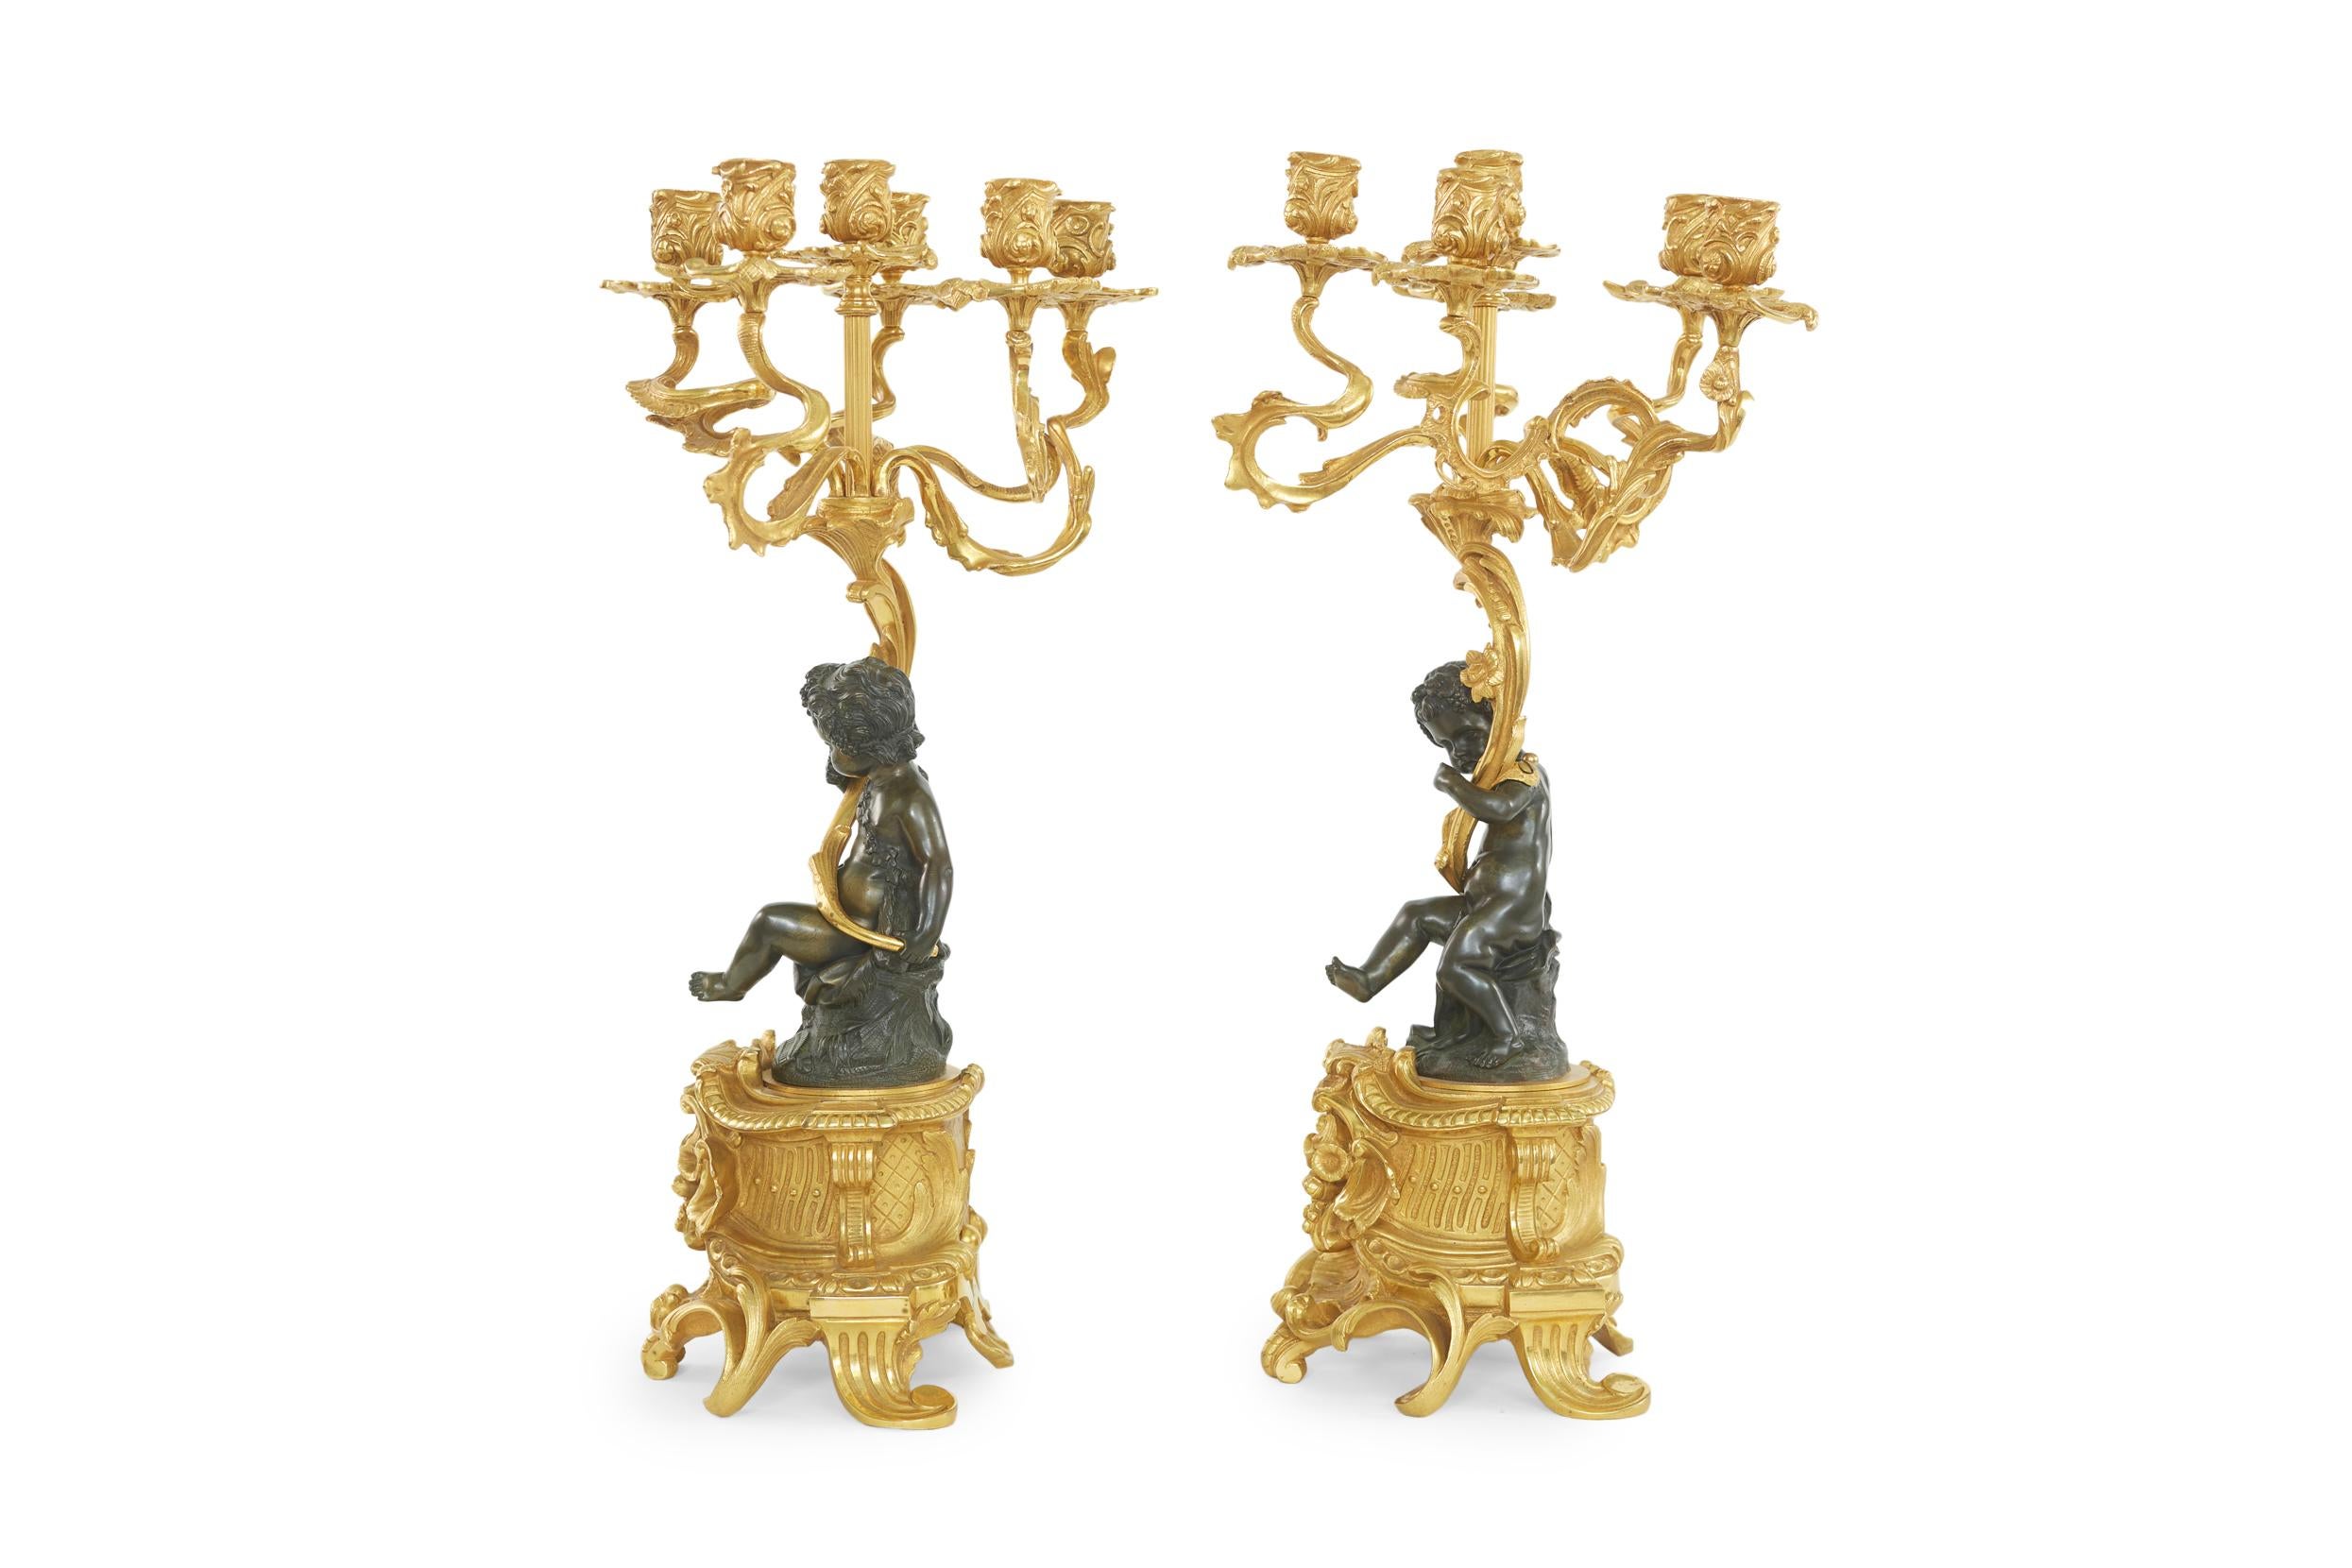 19th century gilt bronze pair of French ormolu and figural six light candelabra featuring two cherubs. Each cherub holds a candelabra sitting barefoot on a rock with clothed in a small piece of fabric with a grape vine wrapped around their heads